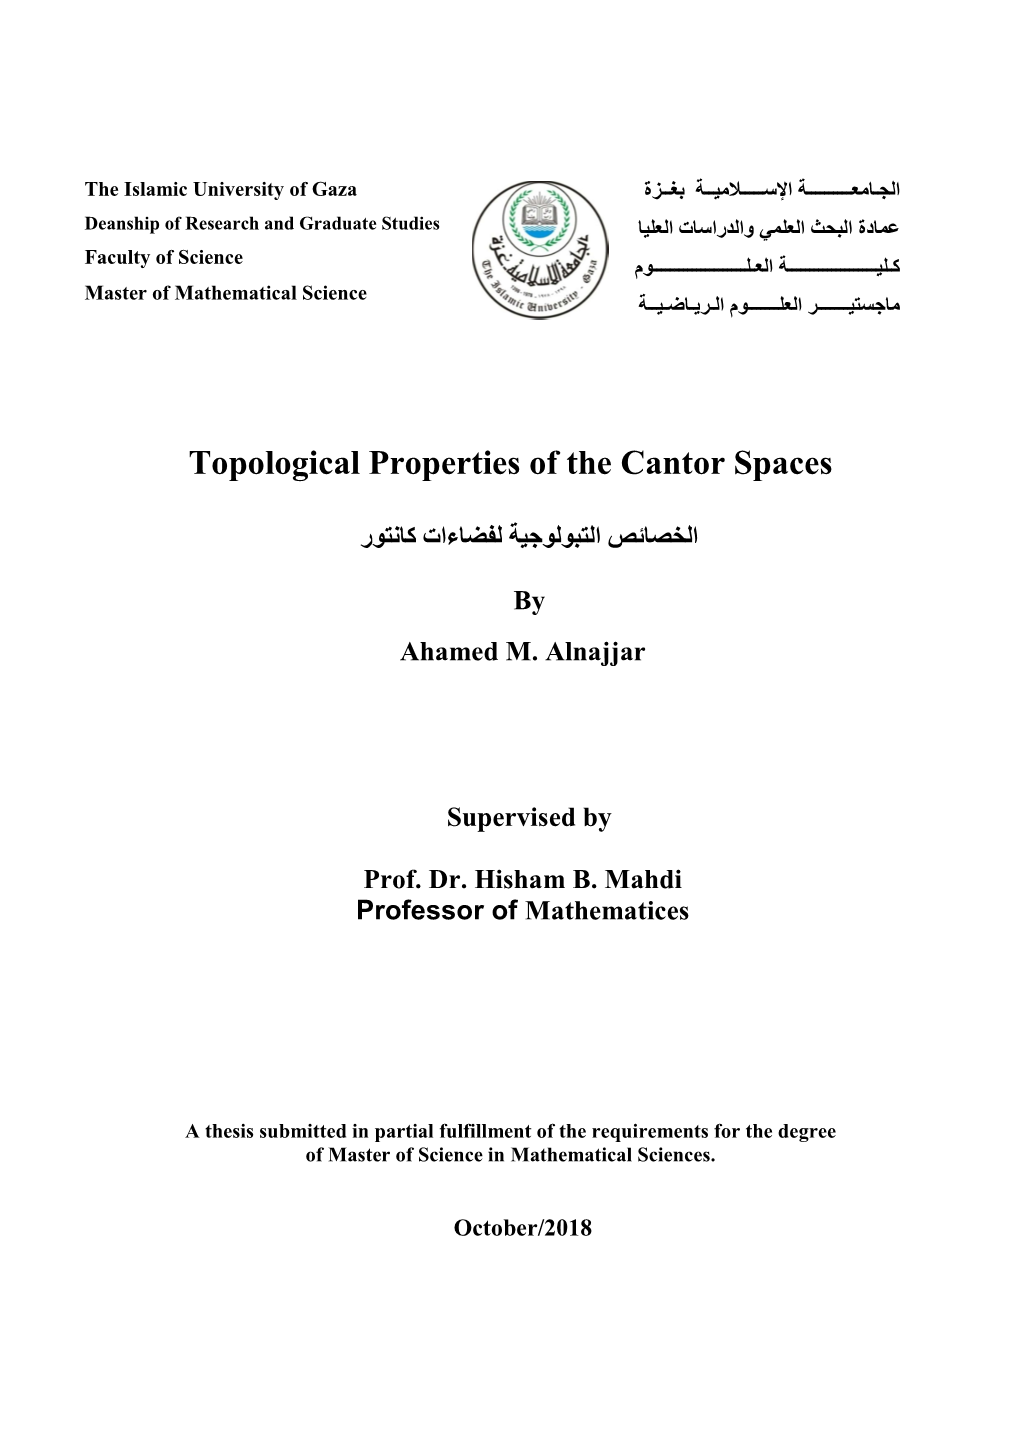 Topological Properties of the Cantor Spaces